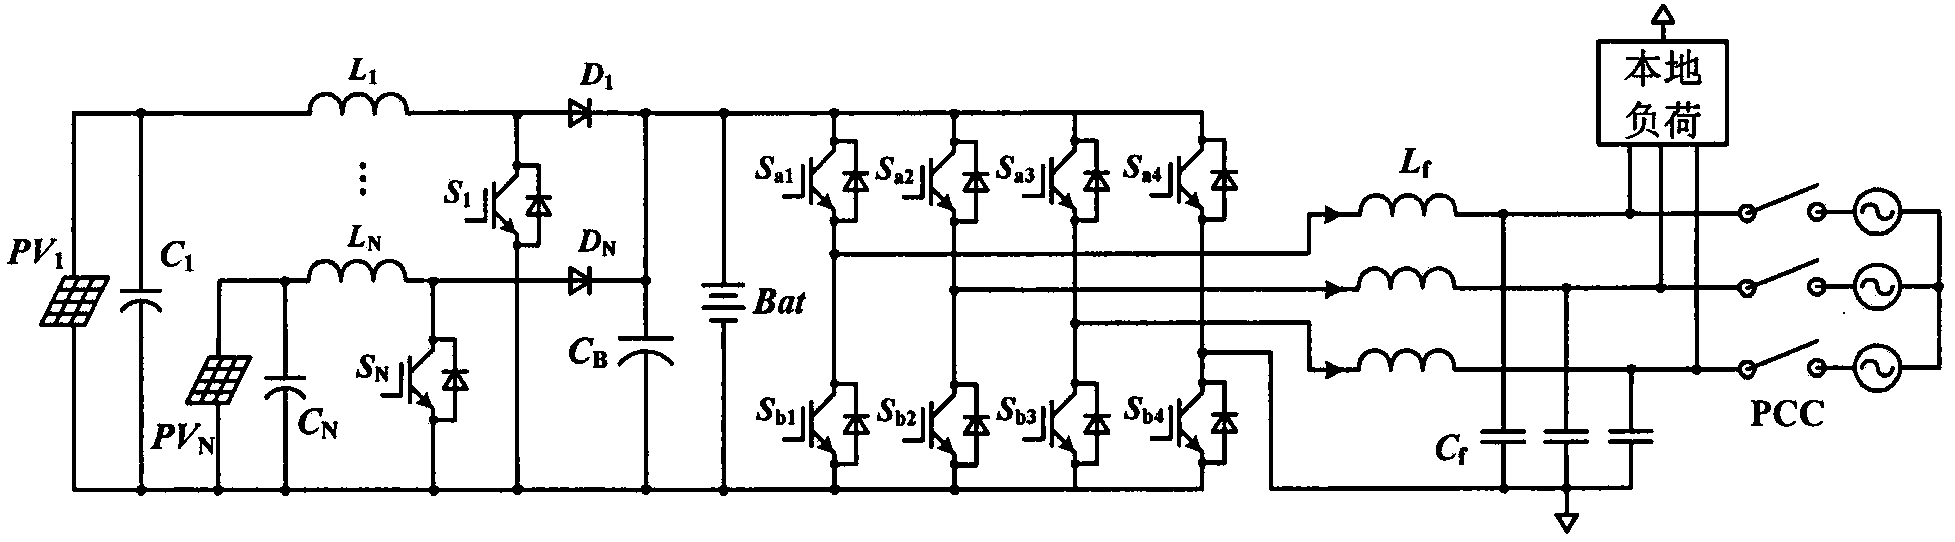 Photovoltaic power generation system structure integrating energy storage and grid-connected and off-grid power supply functions and control method